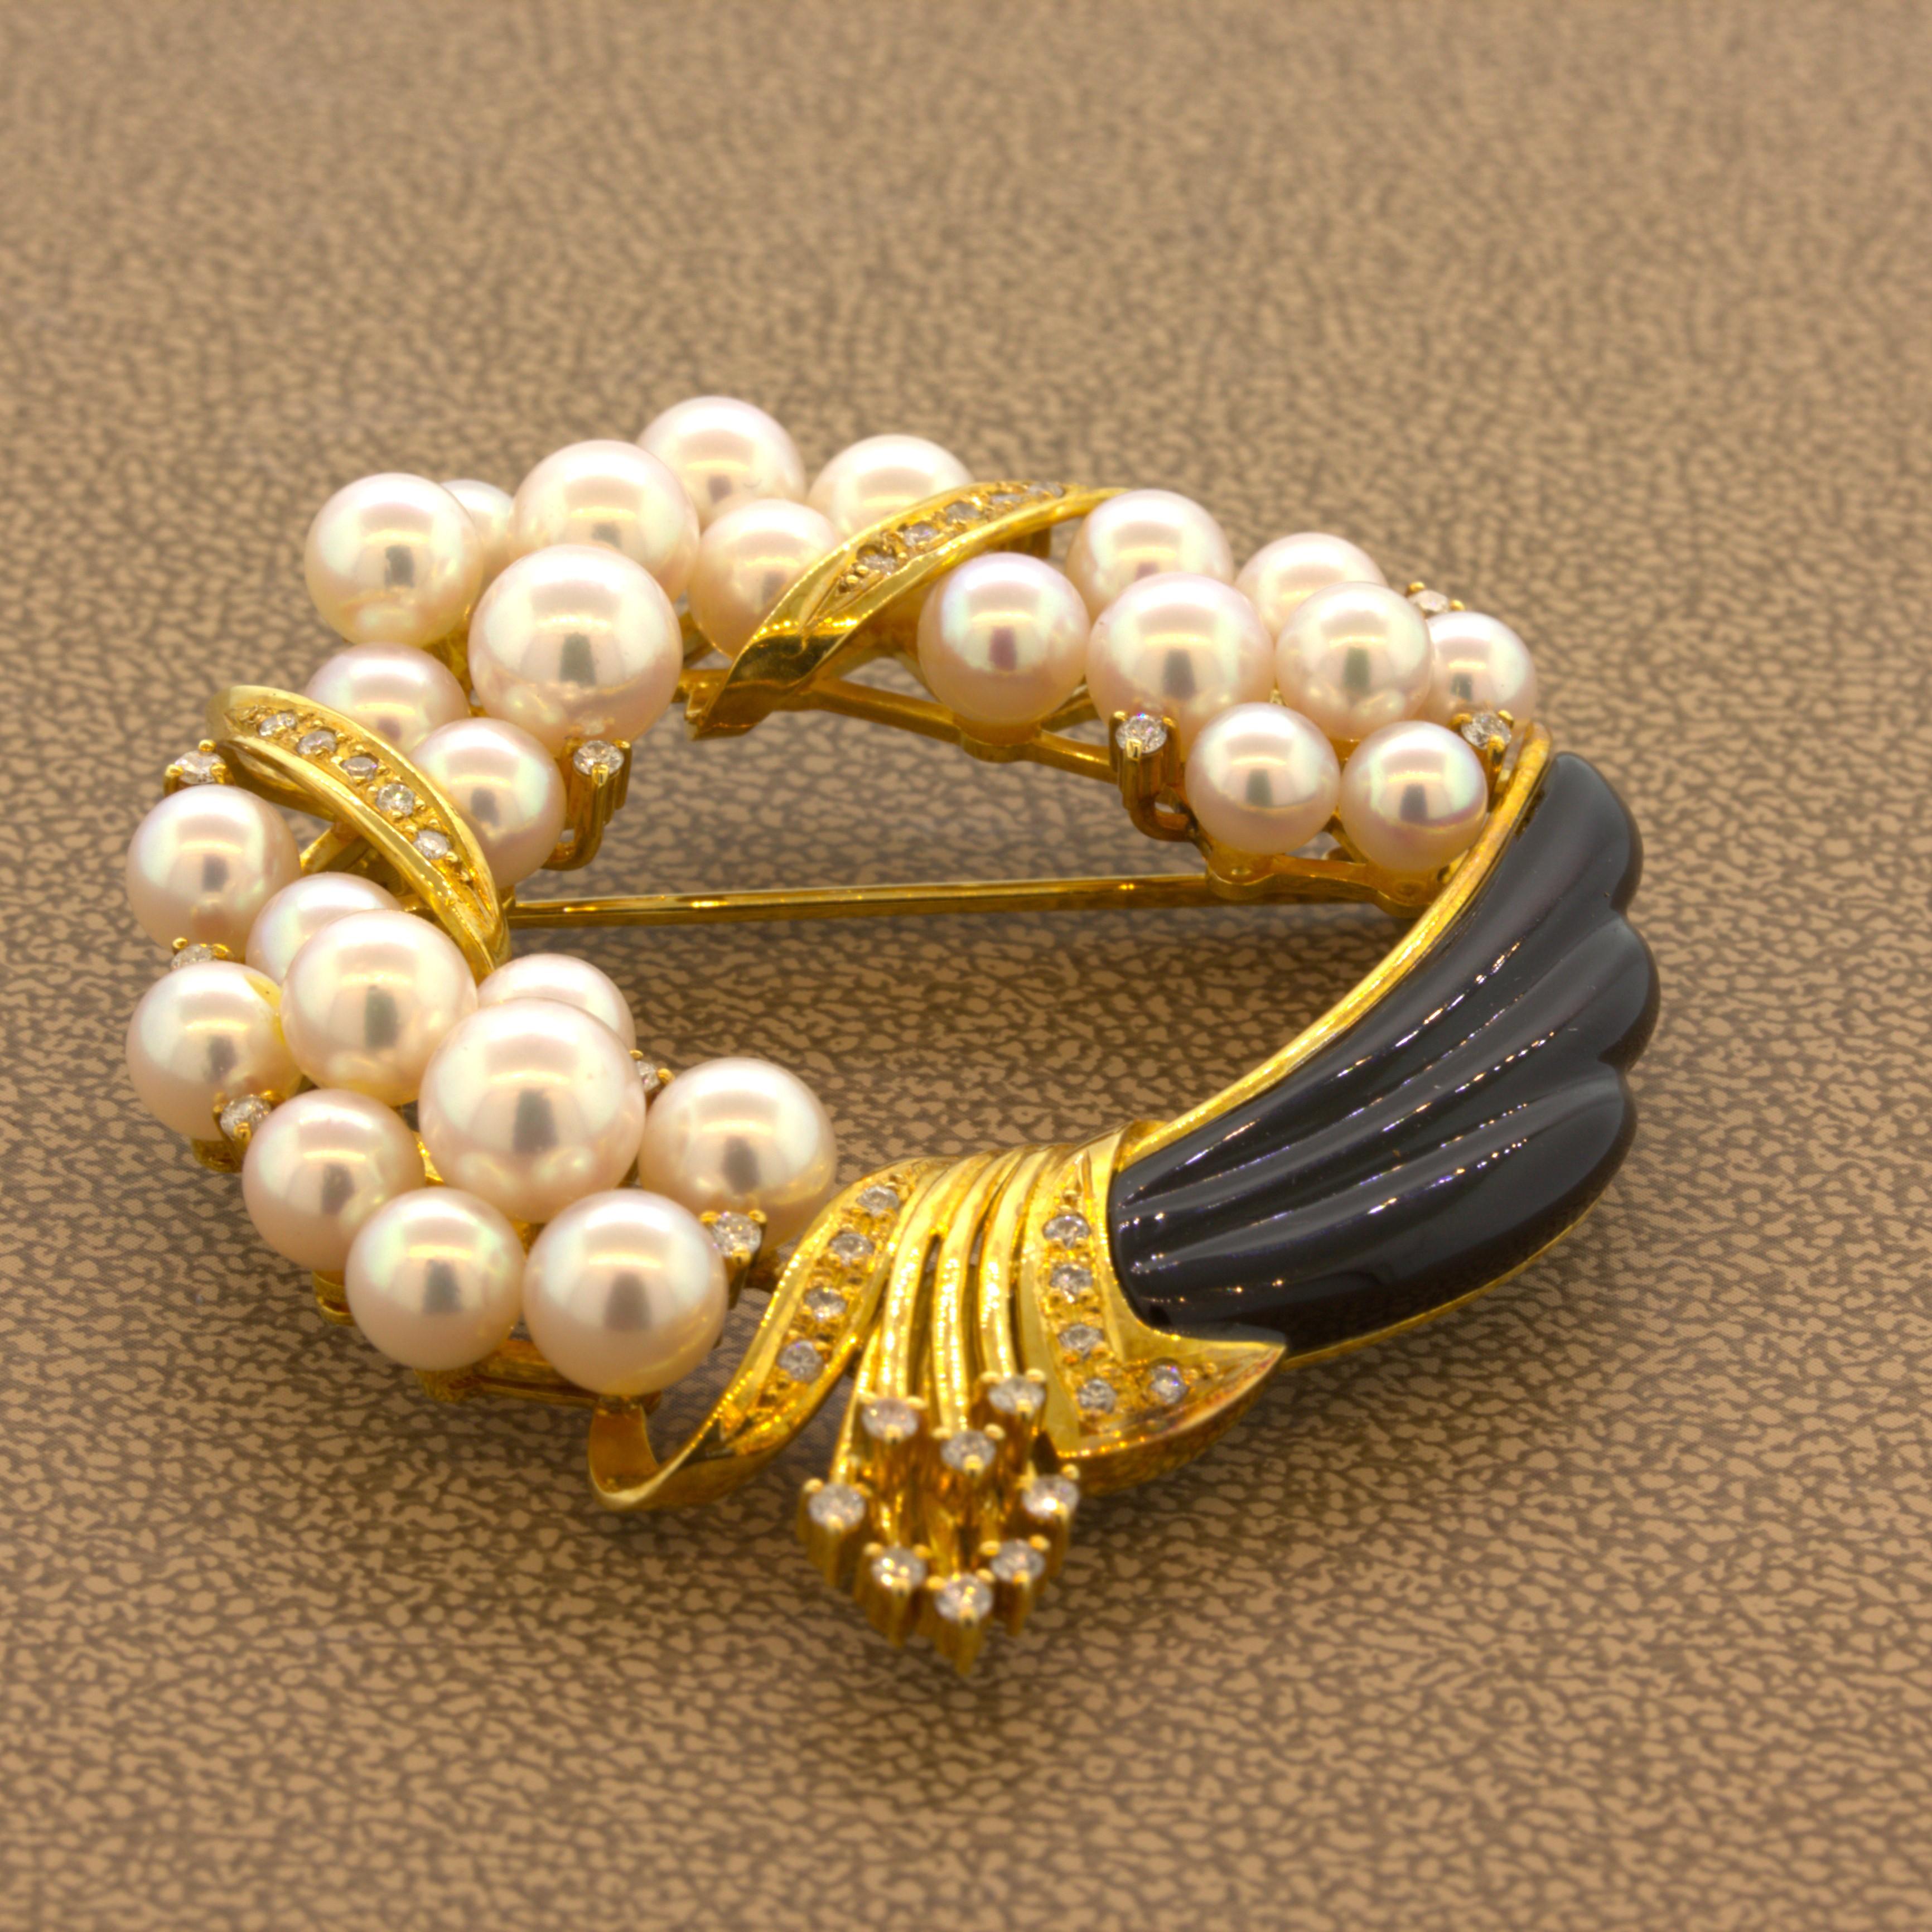 A chic and elegant brooch featuring a plethora of fine AAA Akoya pearls. The pearls measure 5mm x 6.5mm in diameter and are of the finest quality. Each pearl is perfectly rounded with high luster and a super strong pink overtone that makes the